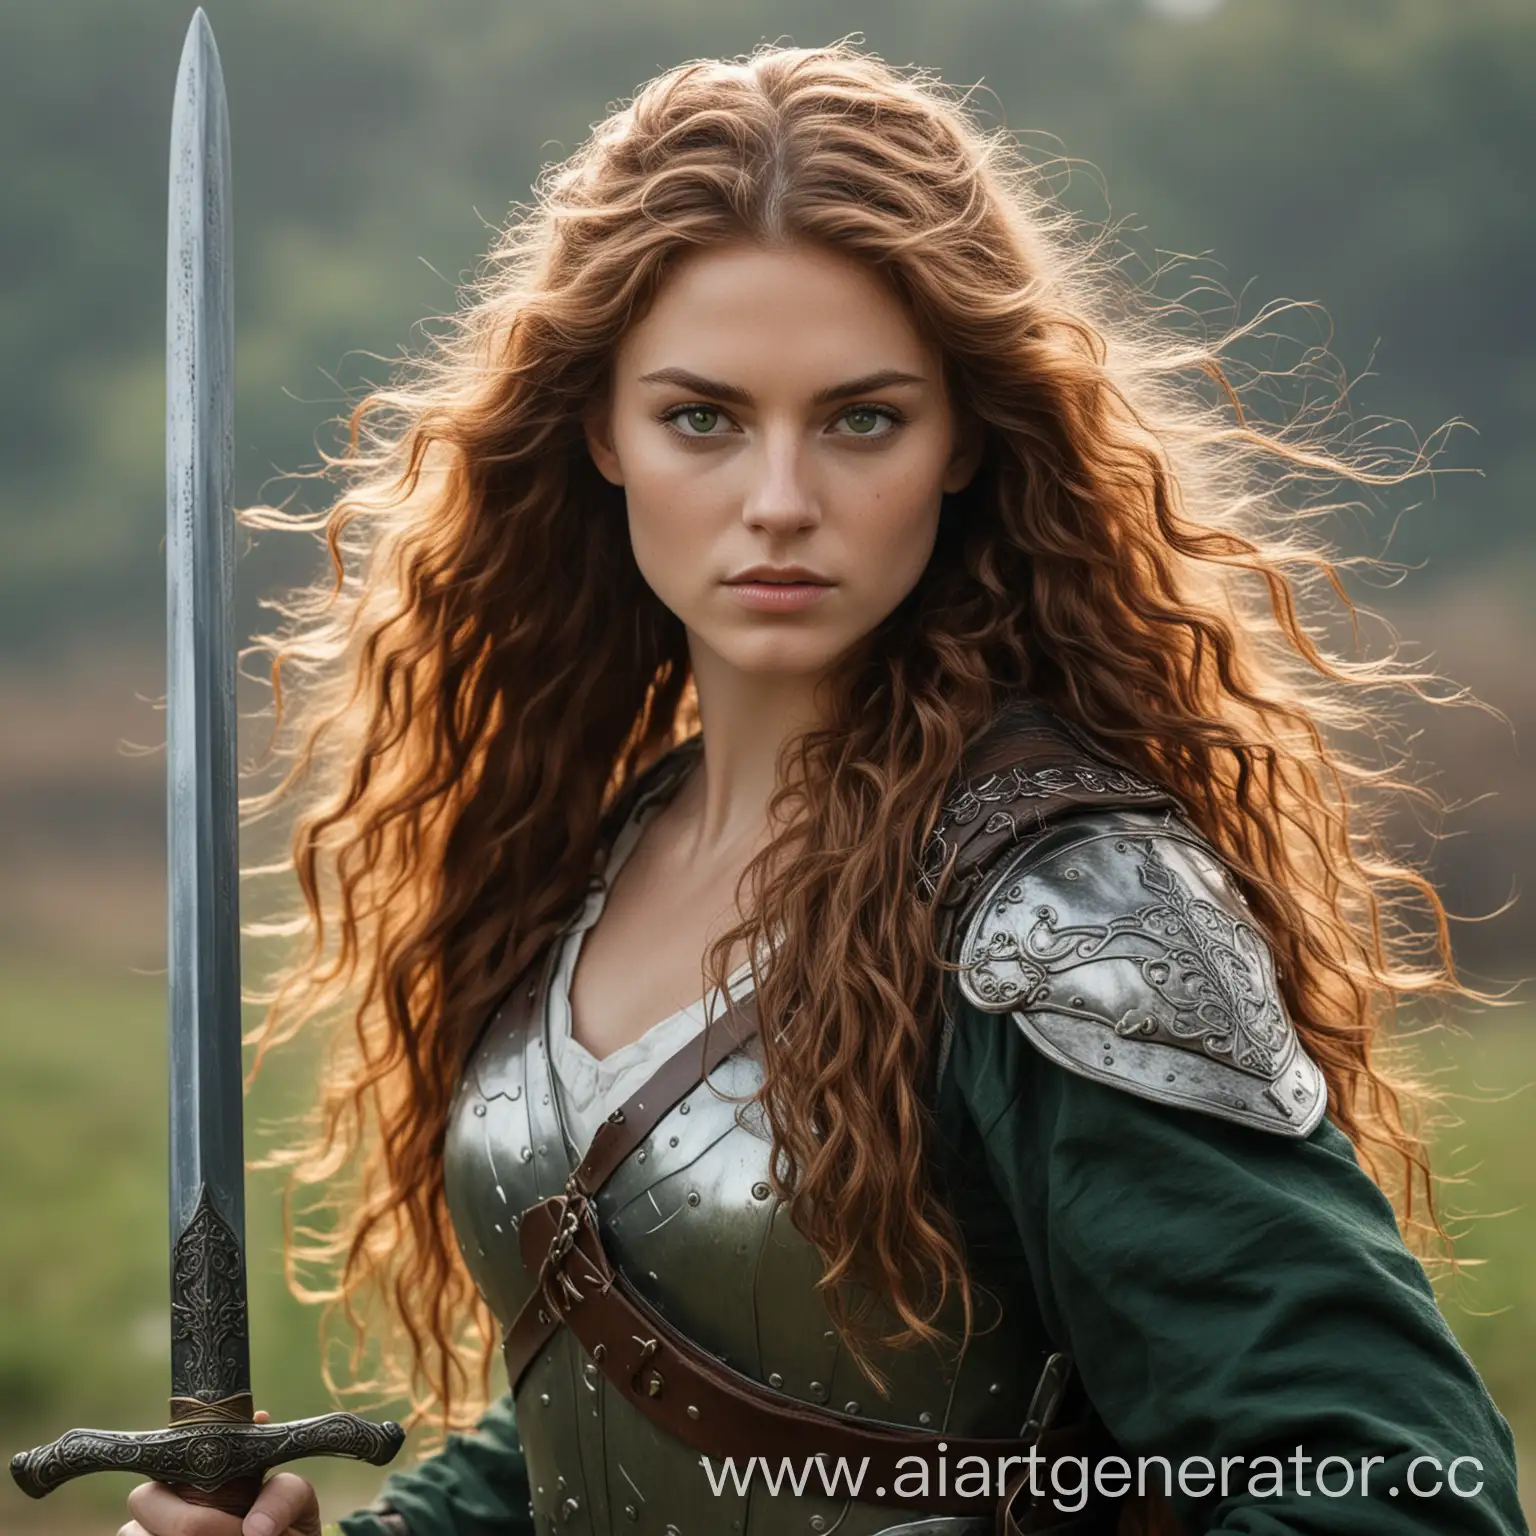 Graceful-Warrior-with-Flowing-Chestnut-Hair-and-Sword-on-the-Battlefield